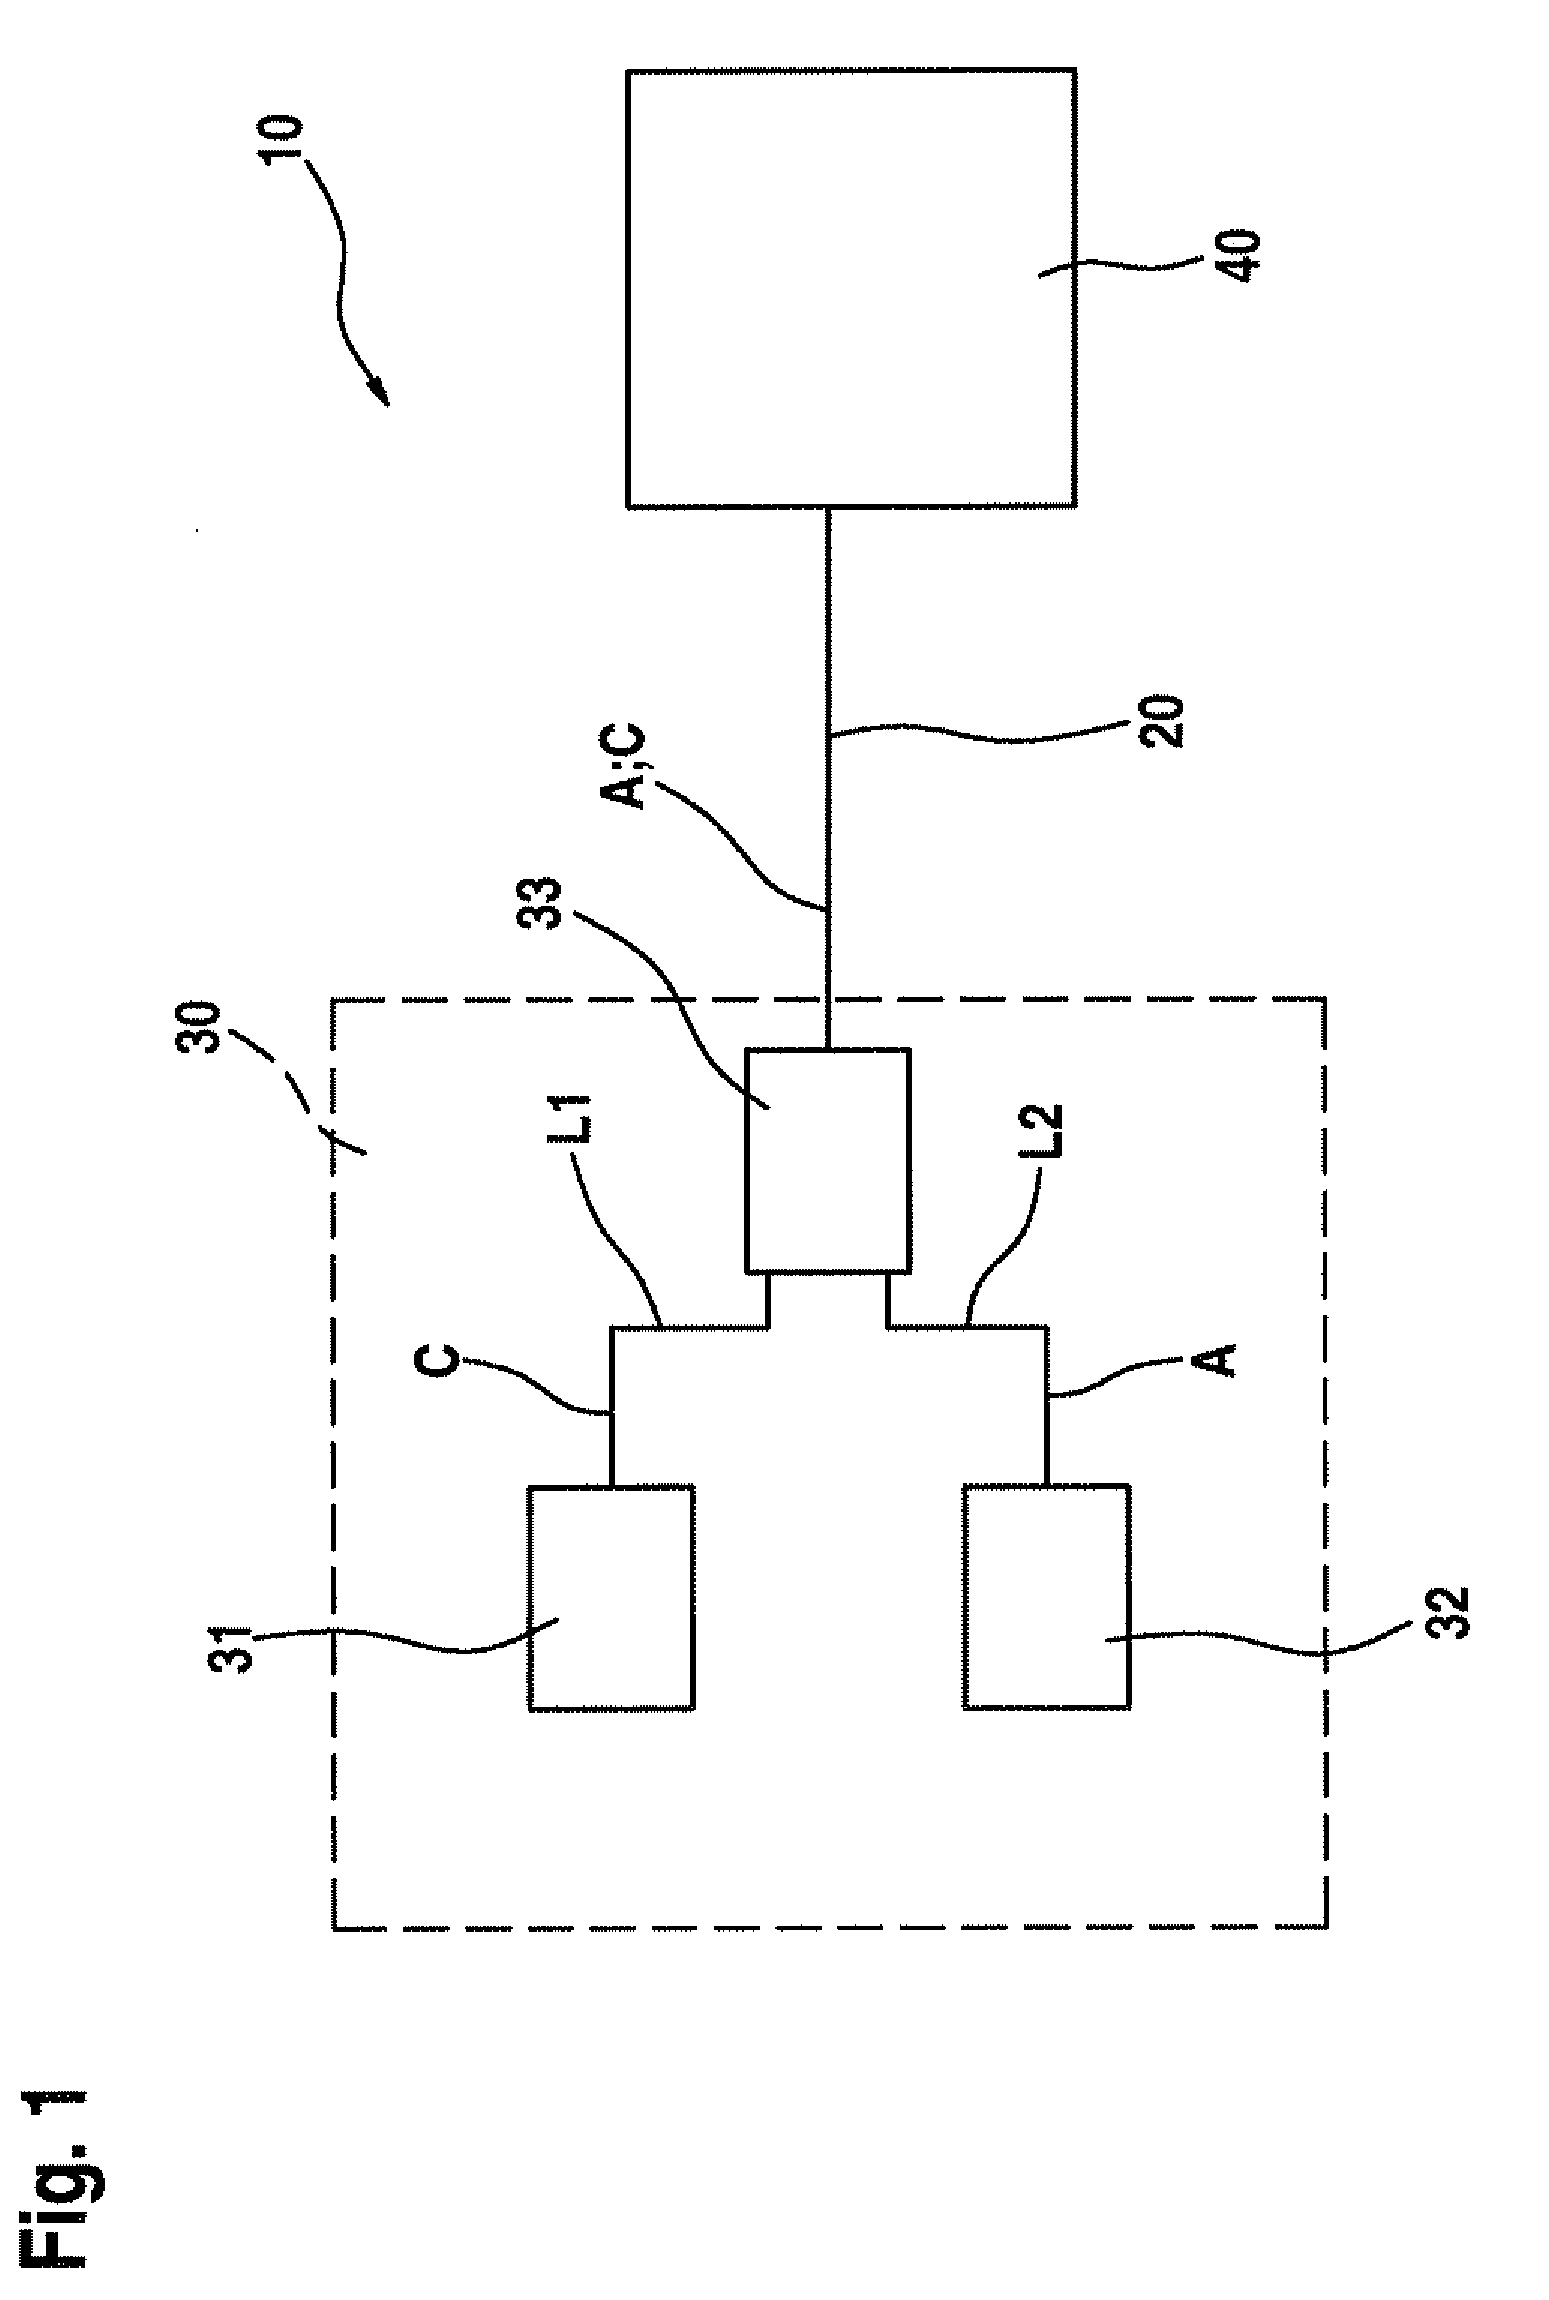 Communication system having a can bus and a method for operating such a communication system